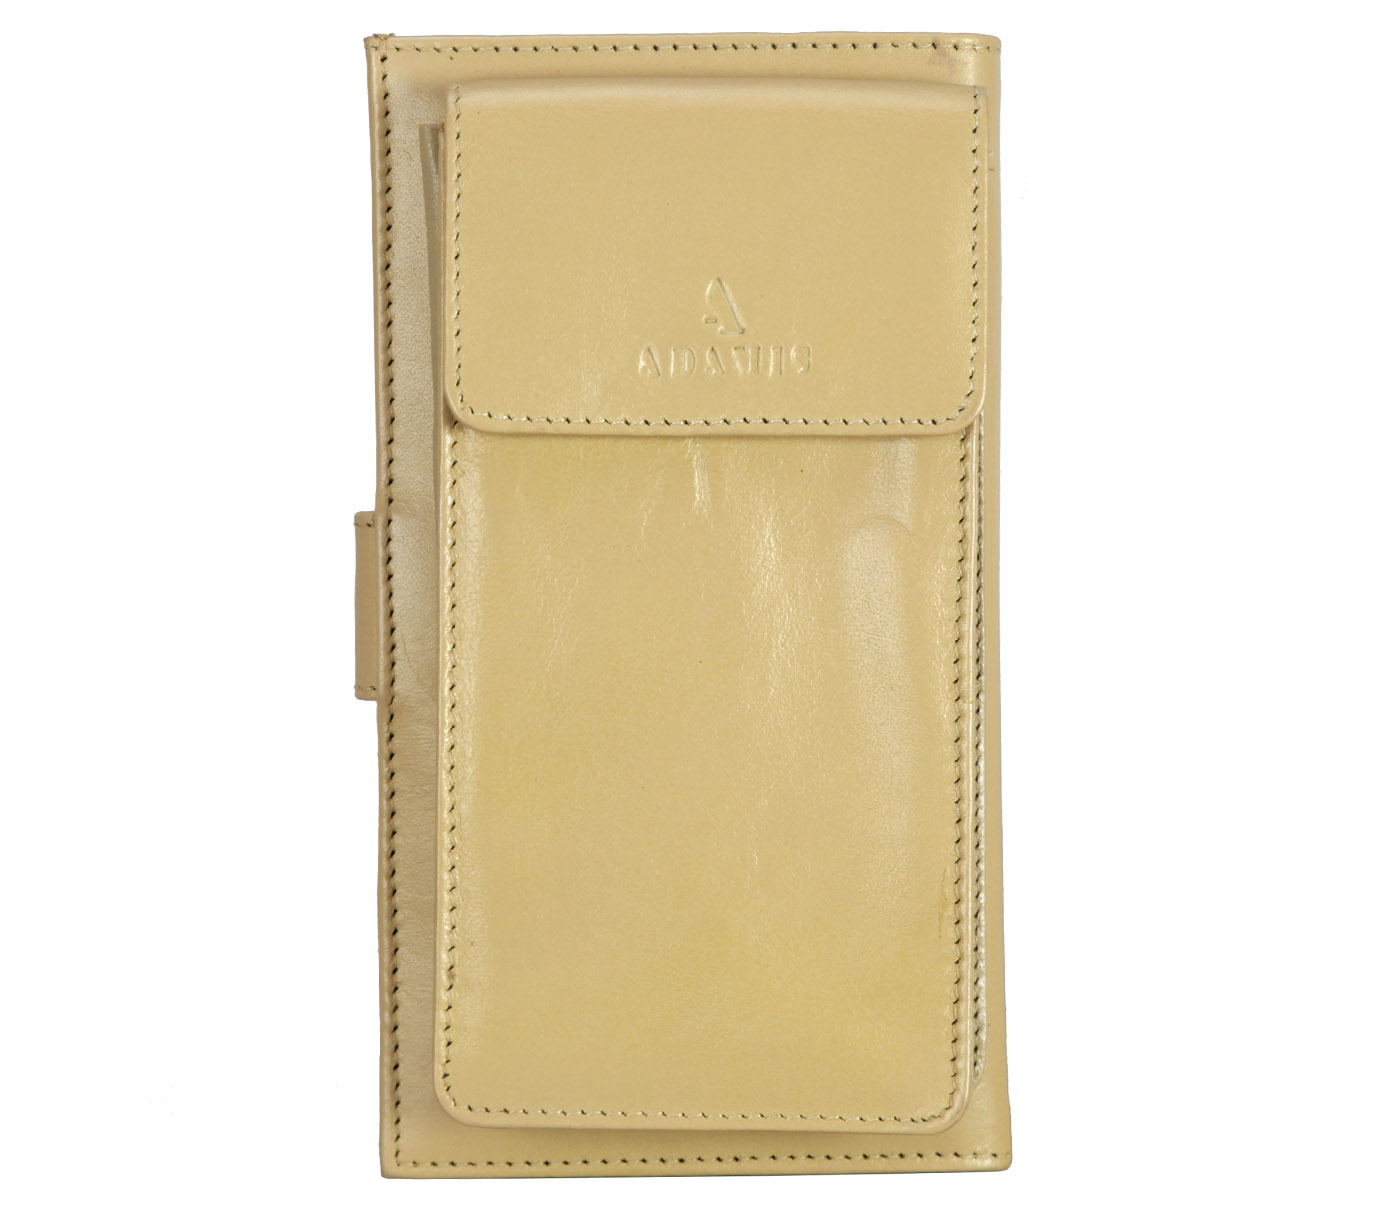 Wallet-Cameron-Women's wallet with mobile holder in Genuine Leather - Beige